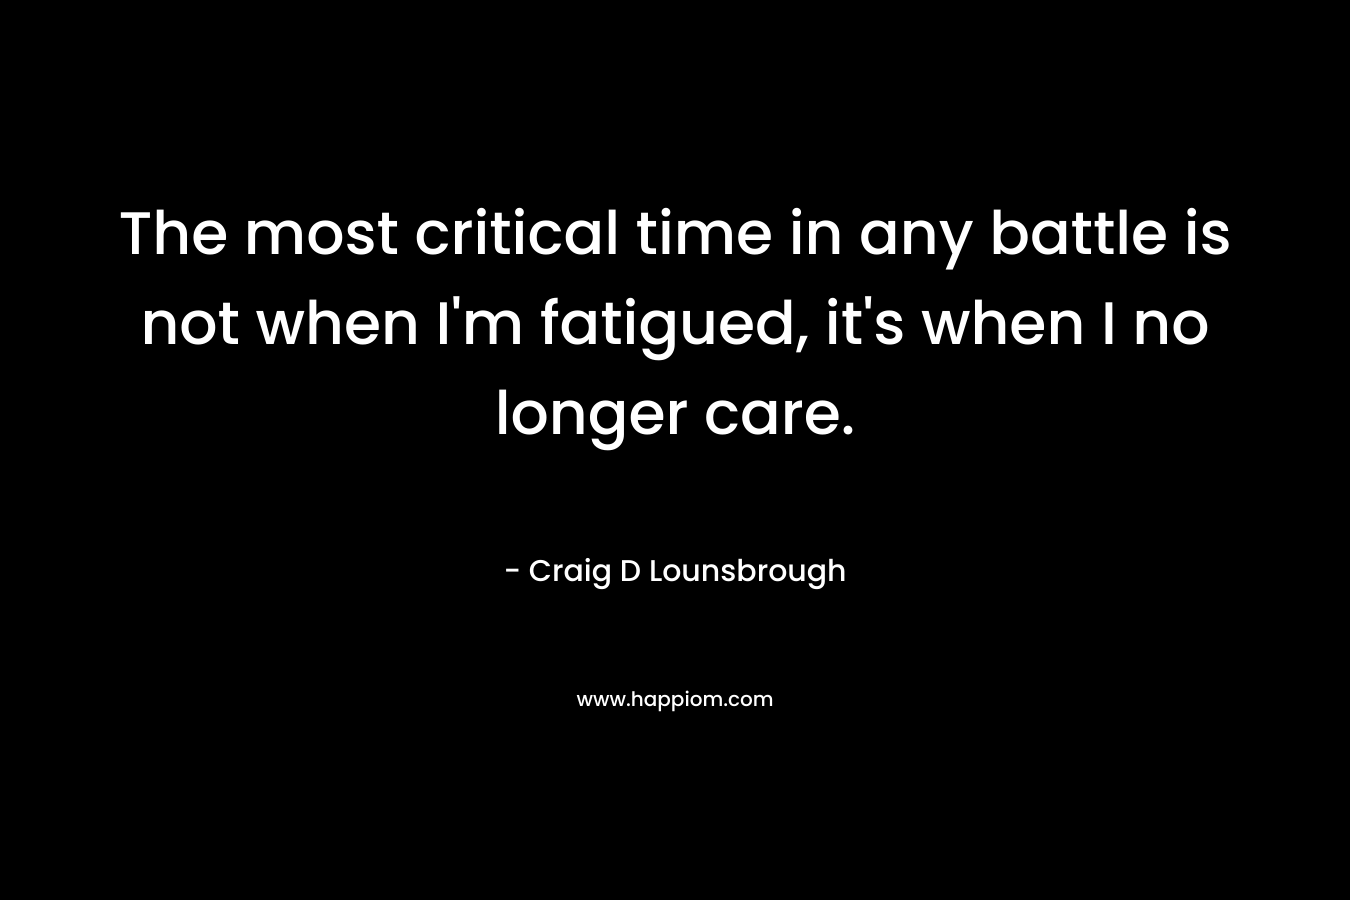 The most critical time in any battle is not when I’m fatigued, it’s when I no longer care. – Craig D Lounsbrough